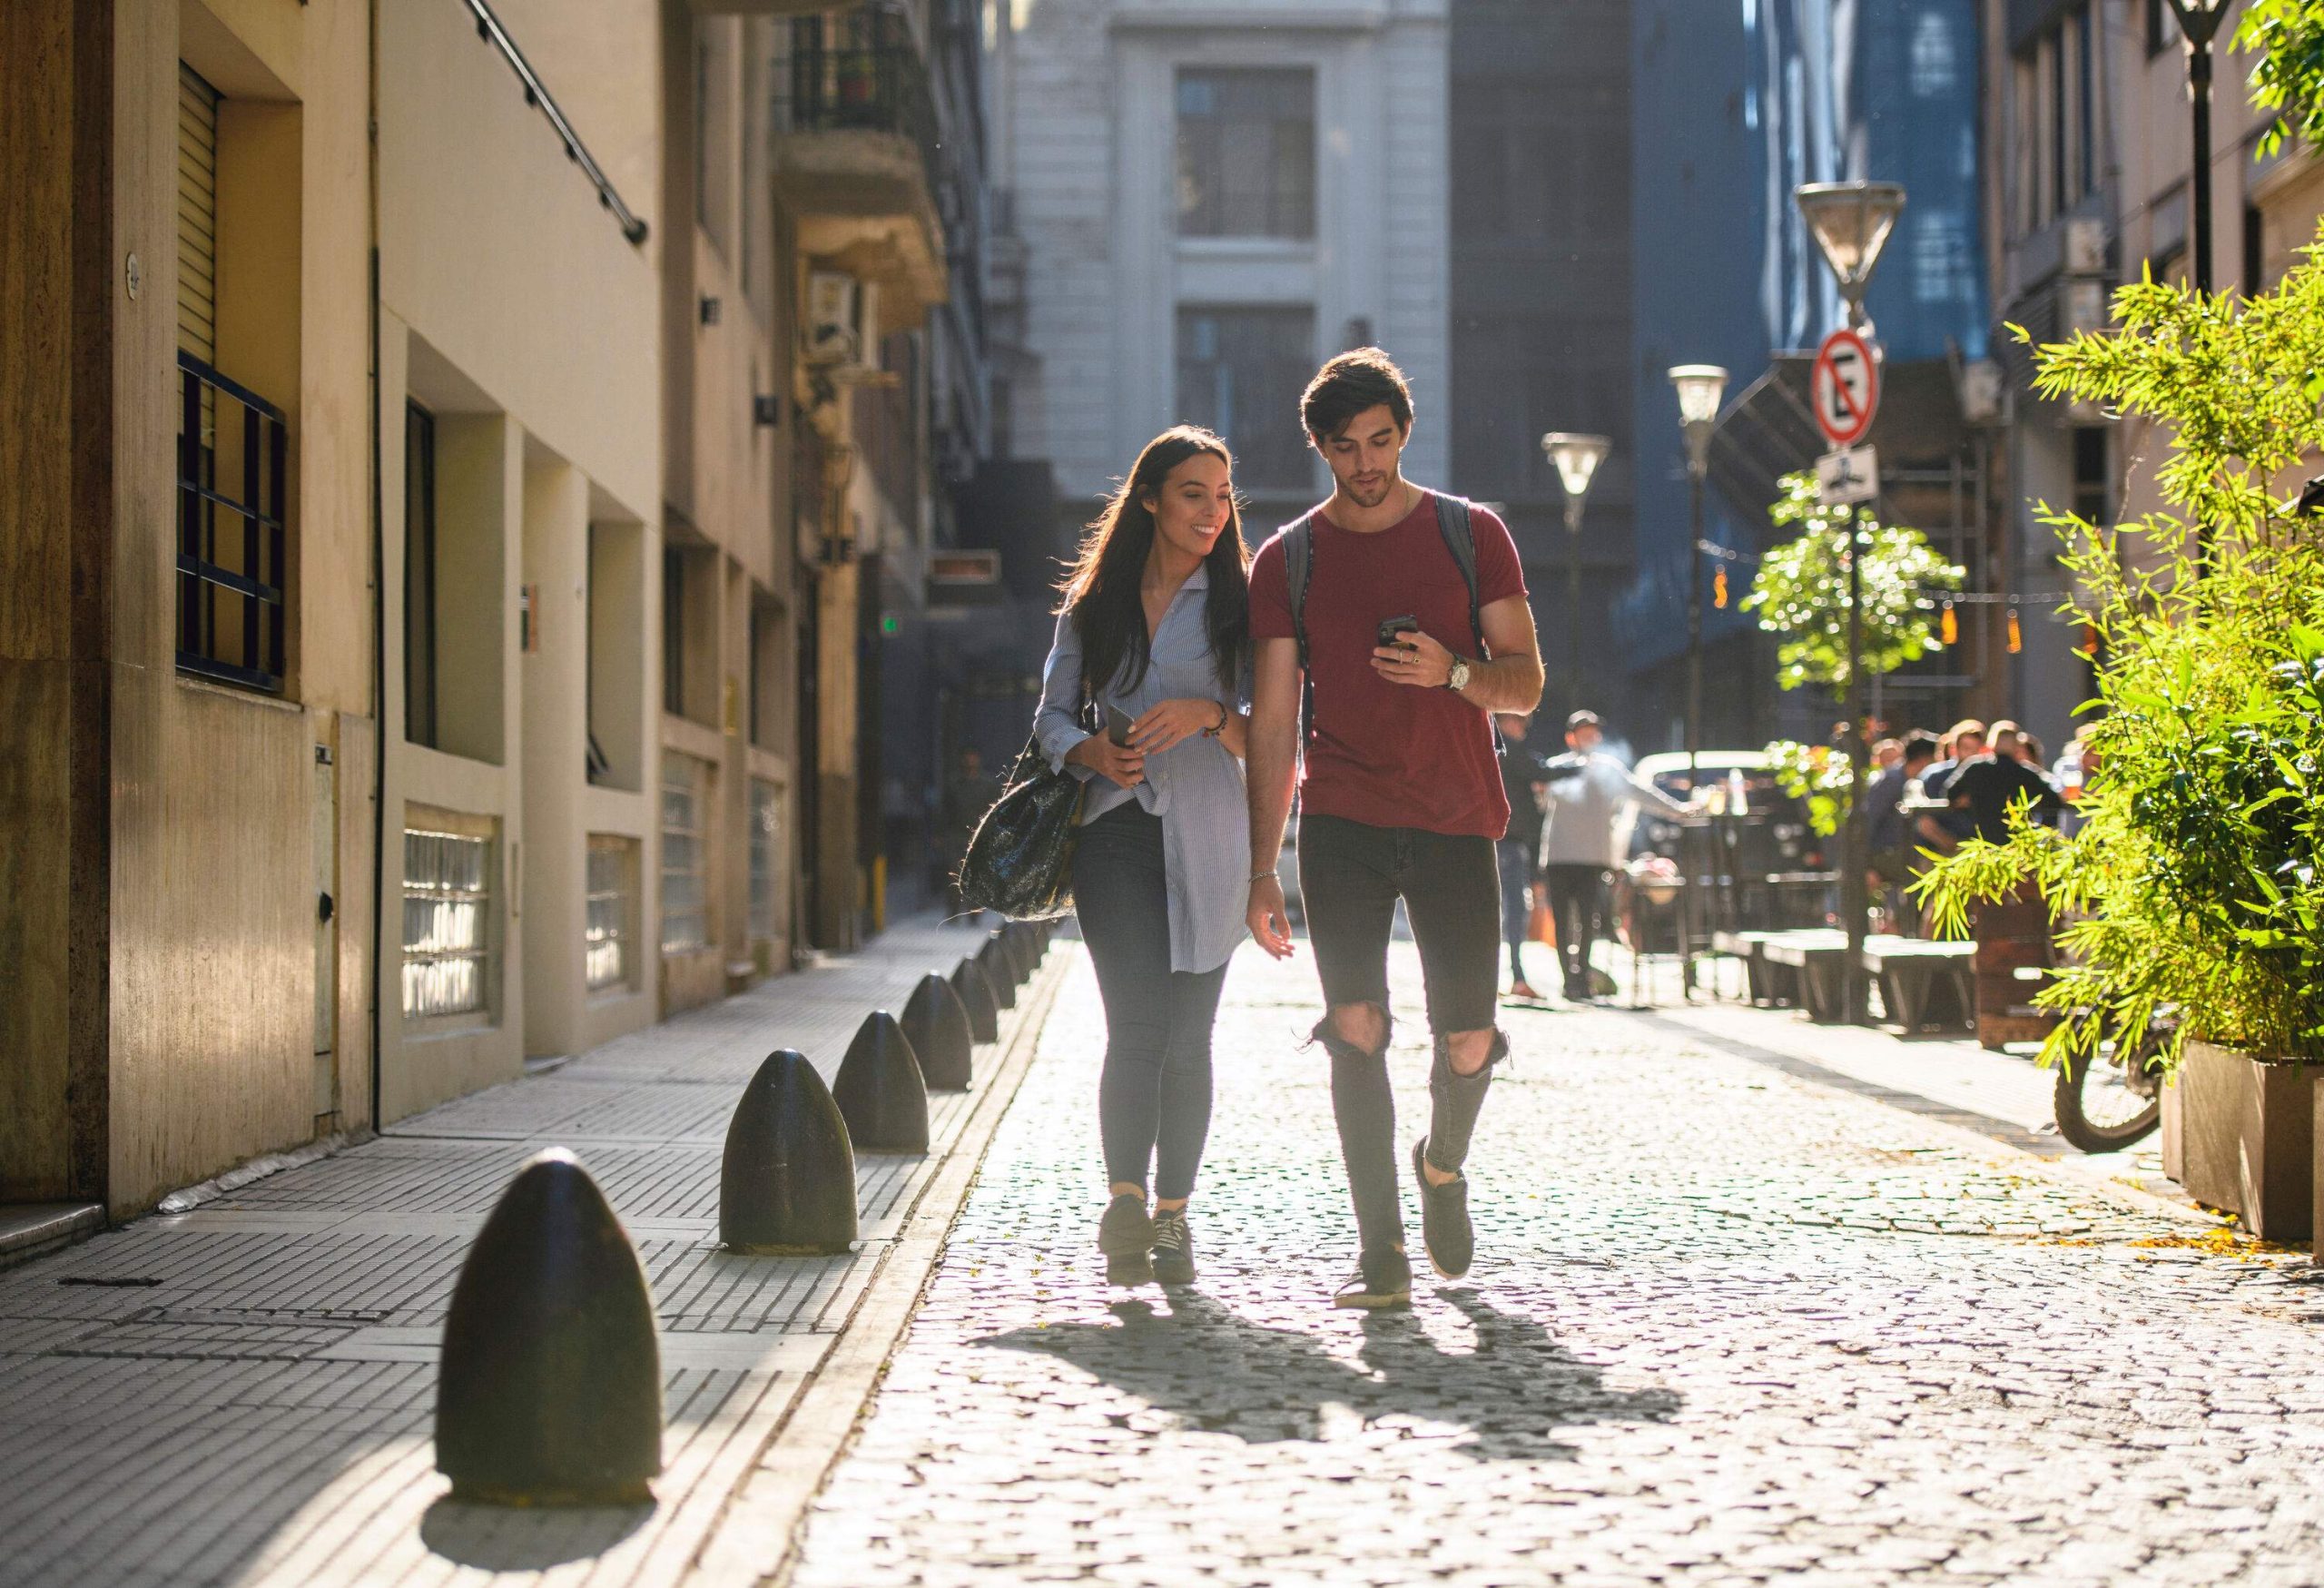 A couple looks at the man's smartphone while walking on the cobbled street enclosed by tall buildings.